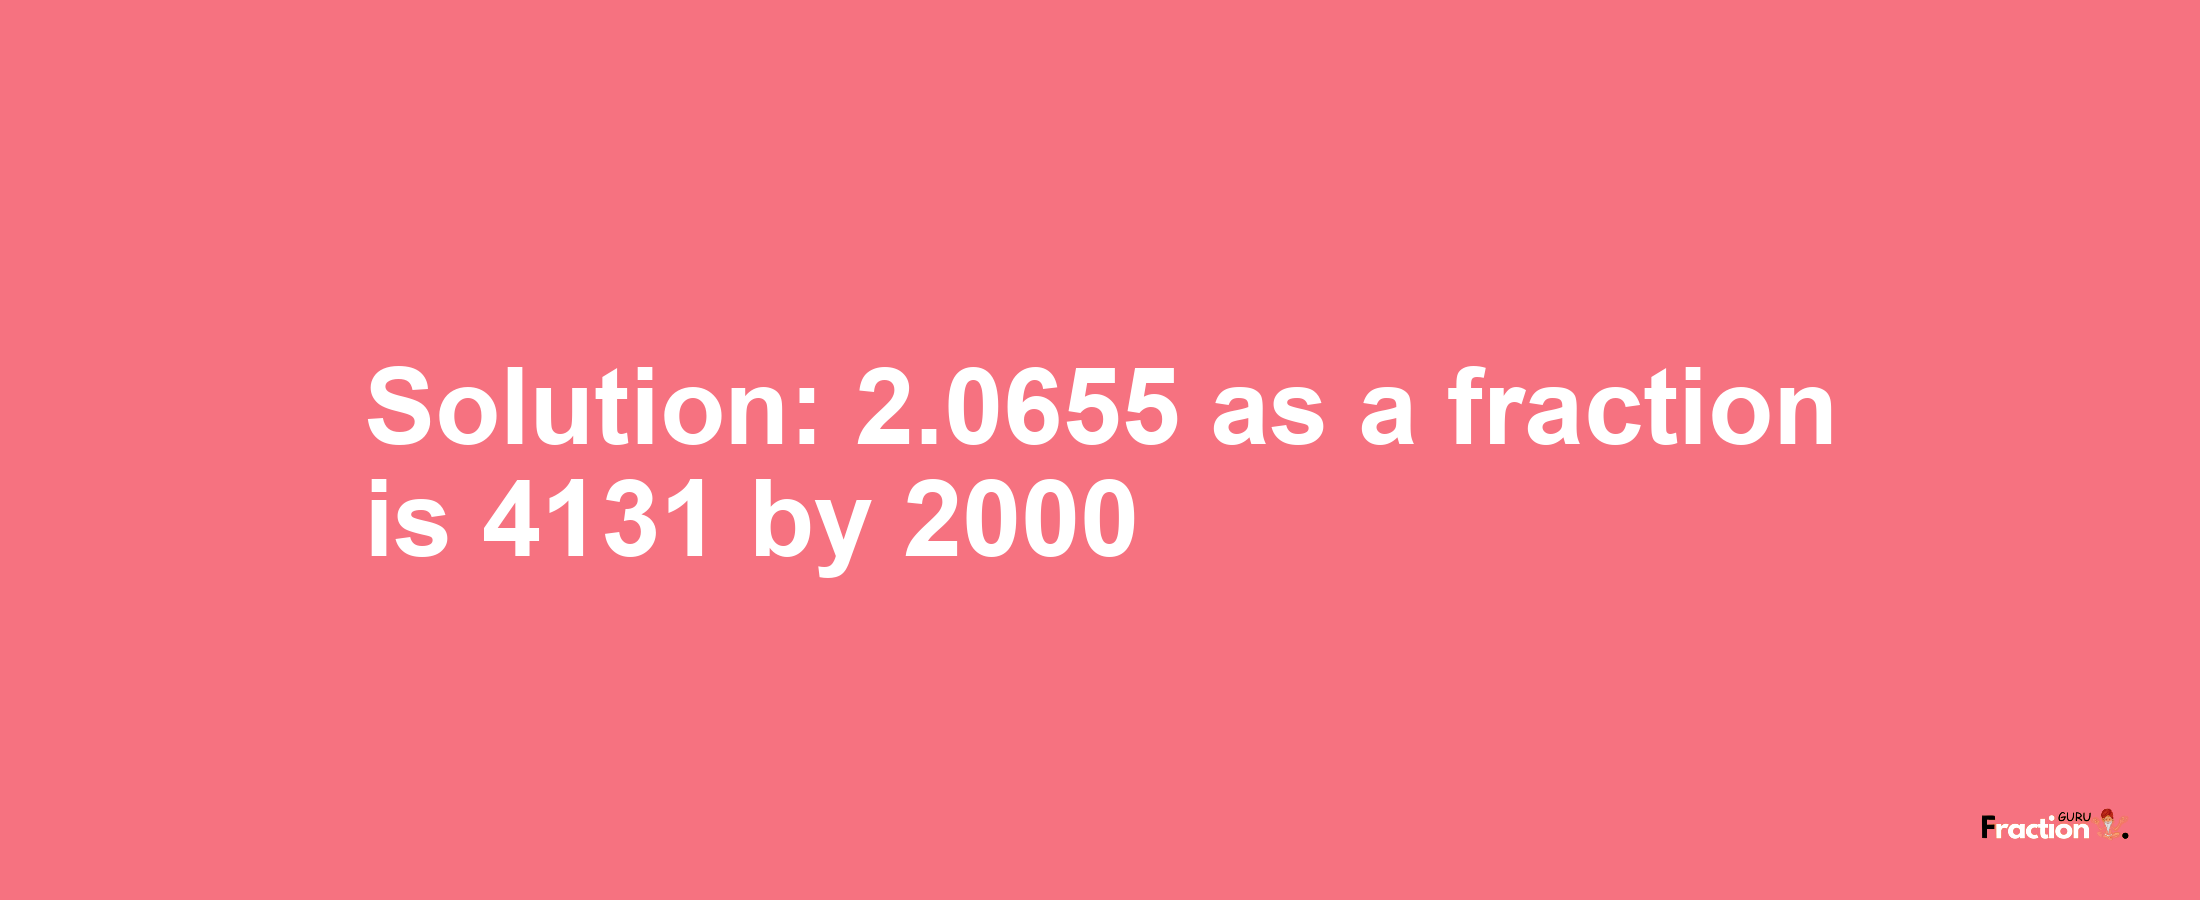 Solution:2.0655 as a fraction is 4131/2000